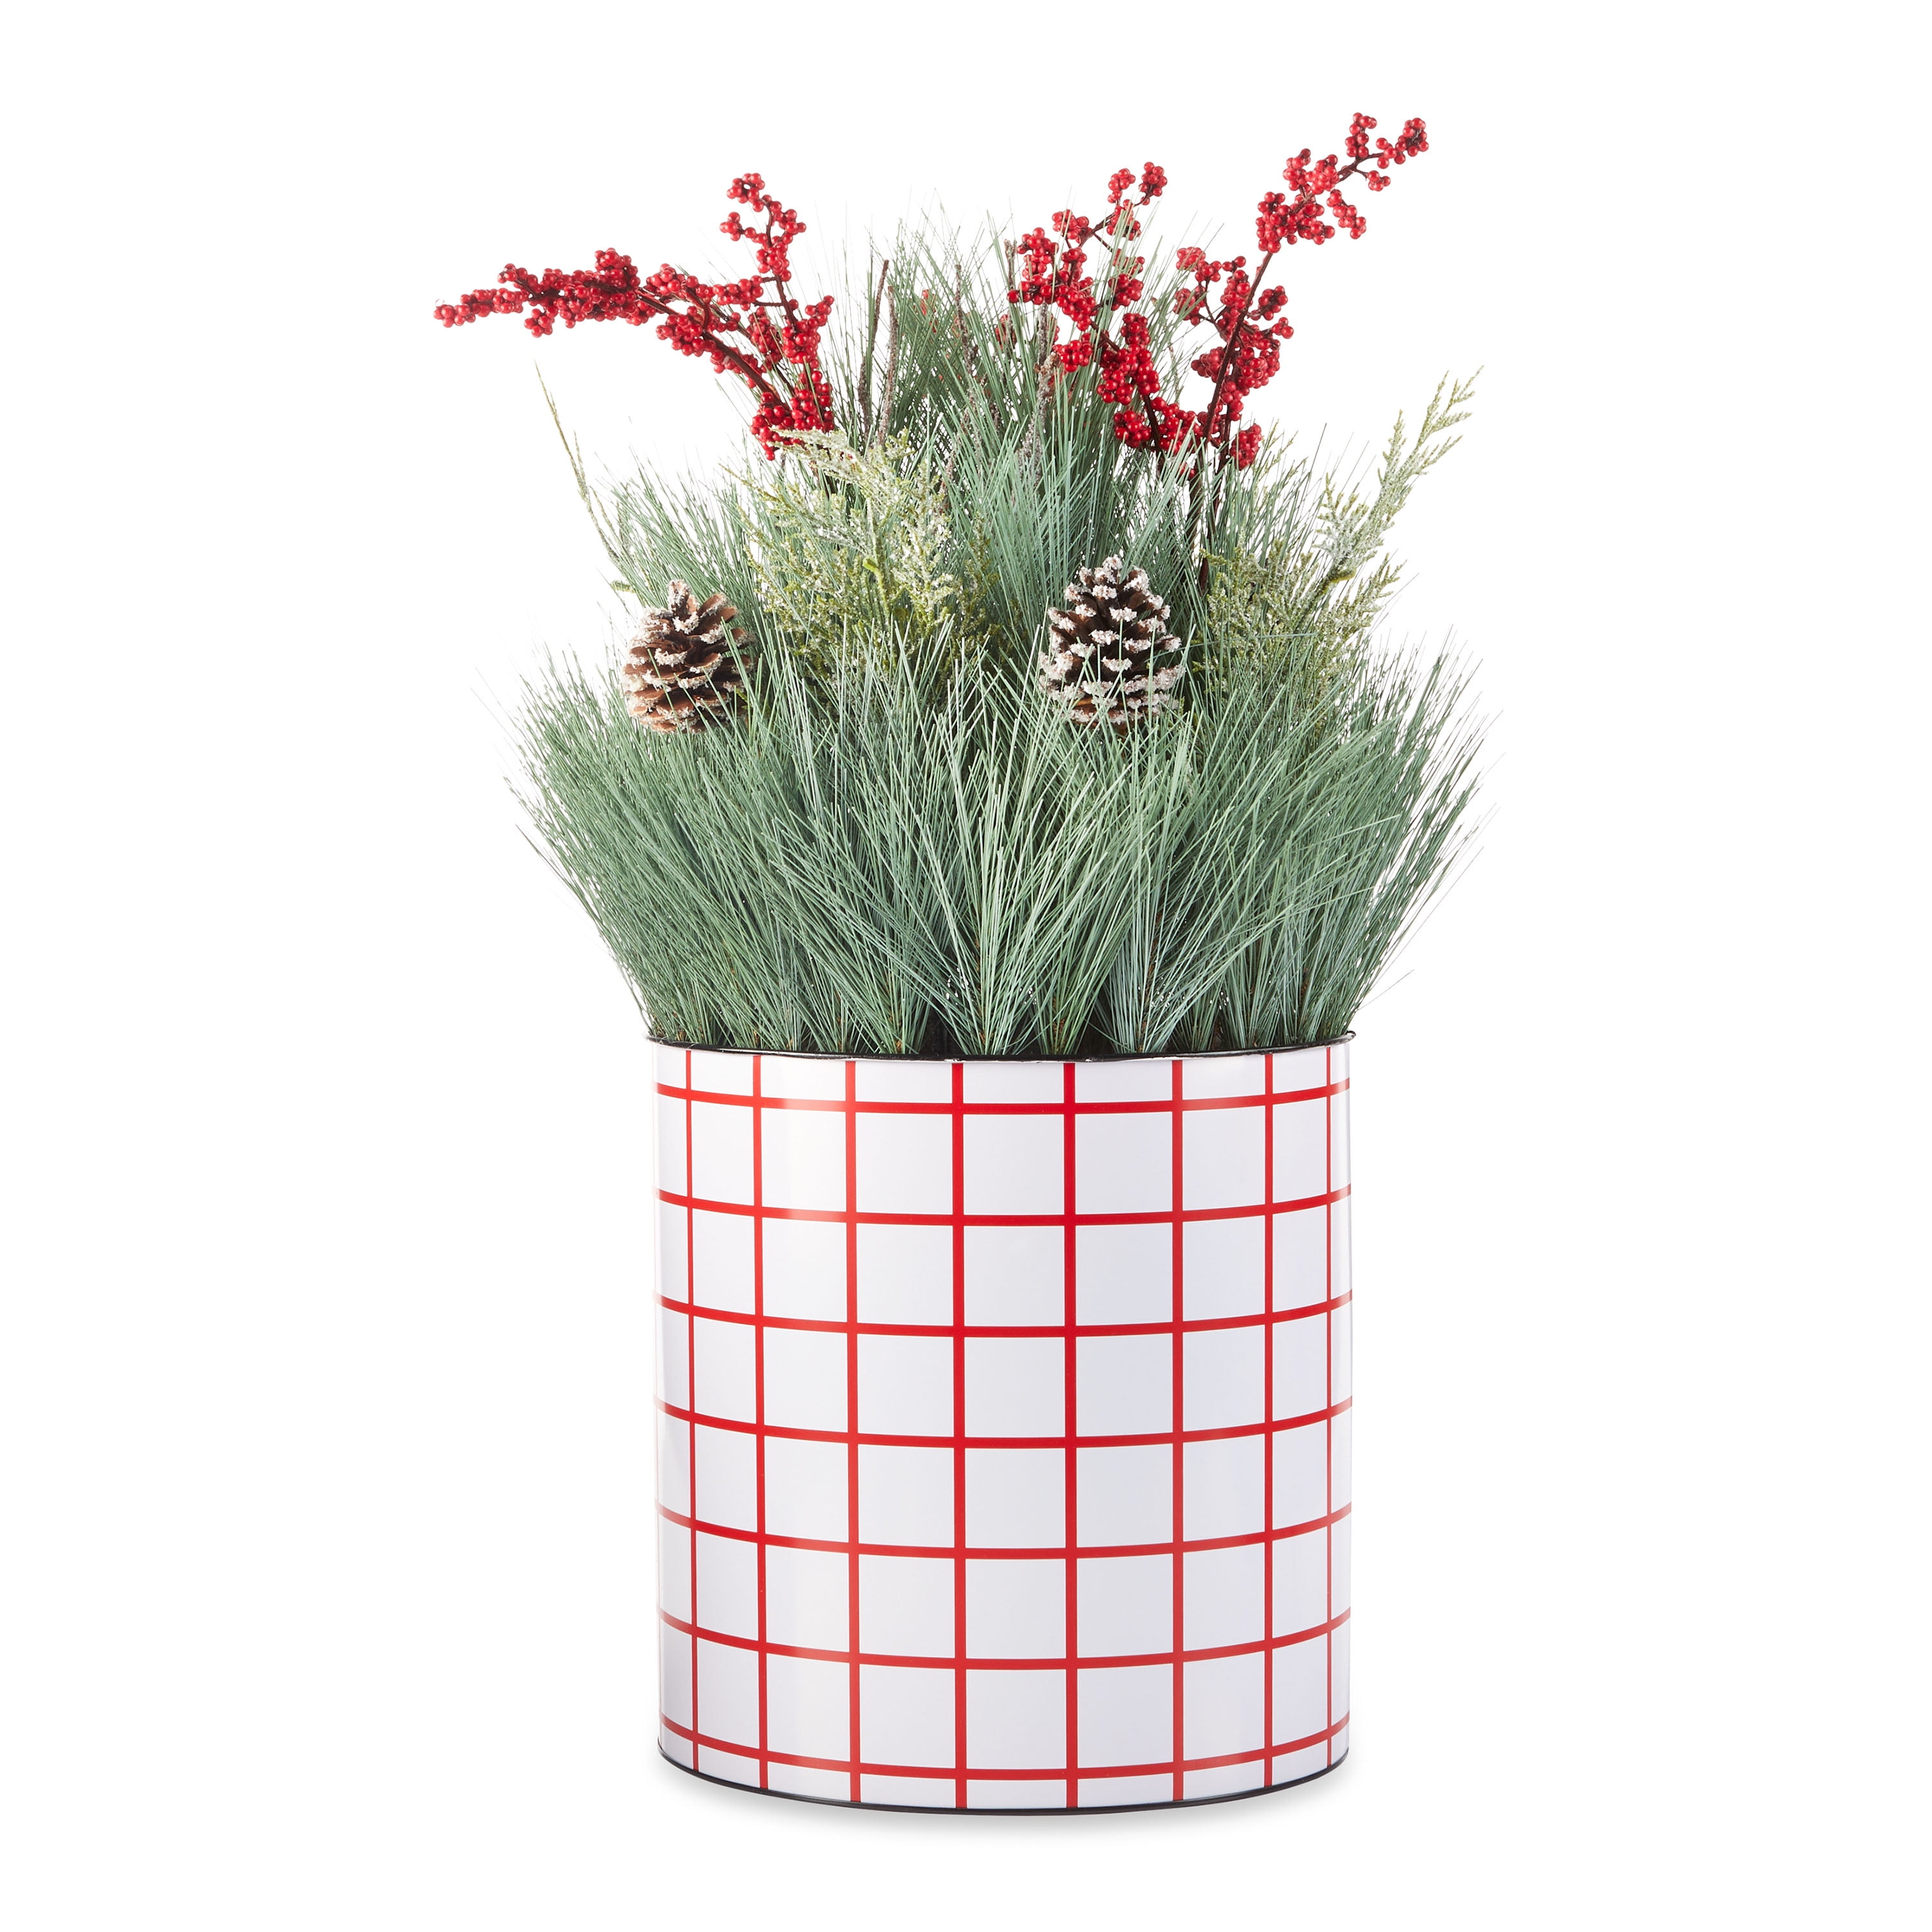 Holiday Time Plaid Bucket with Greenery Decoration, Red and White, 22"